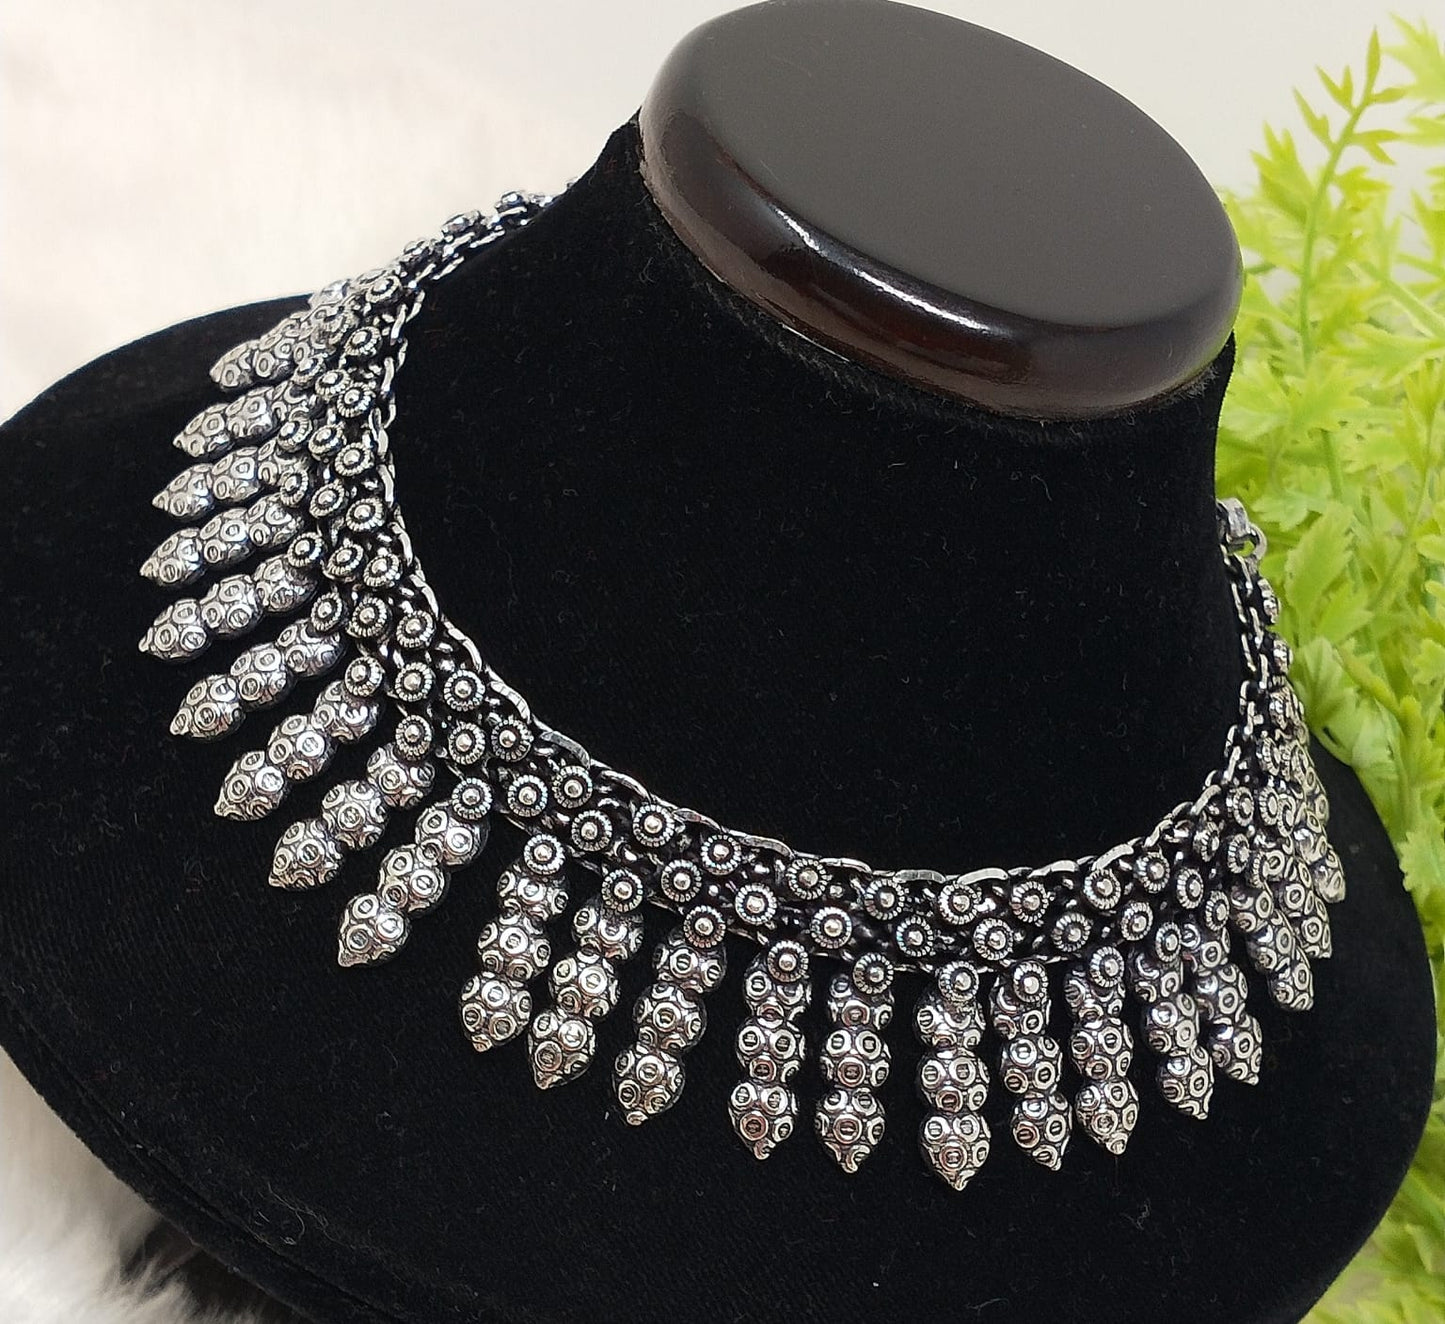 Ethnic German Silver Oxidized Necklace